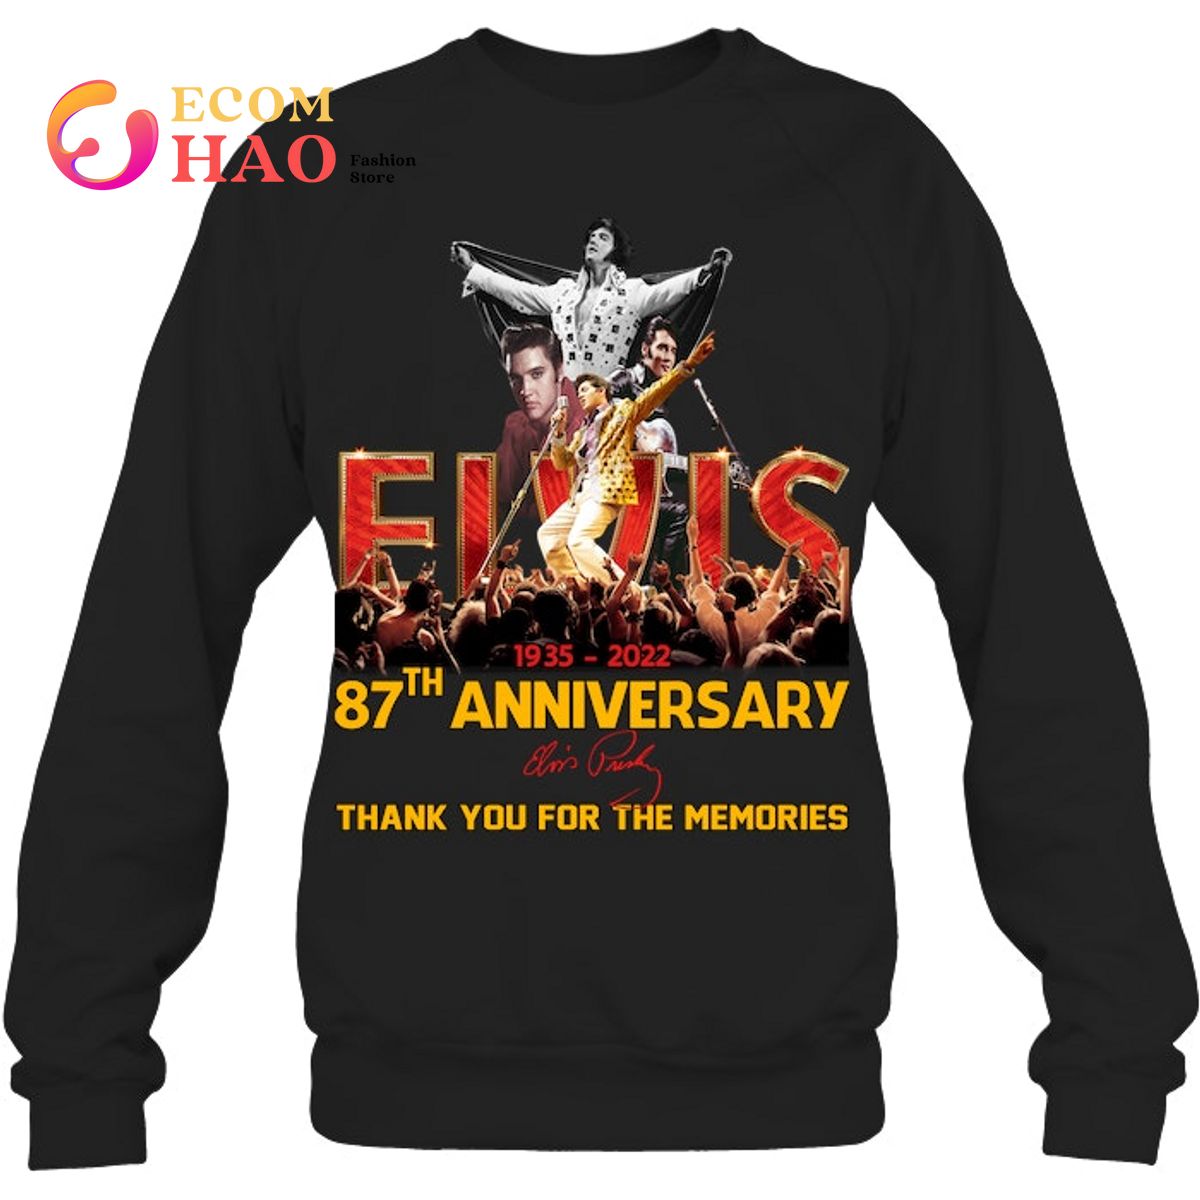 1935 - 2022 87th Anniversary Elvis Presley Thank You For The Memories T-Shirt